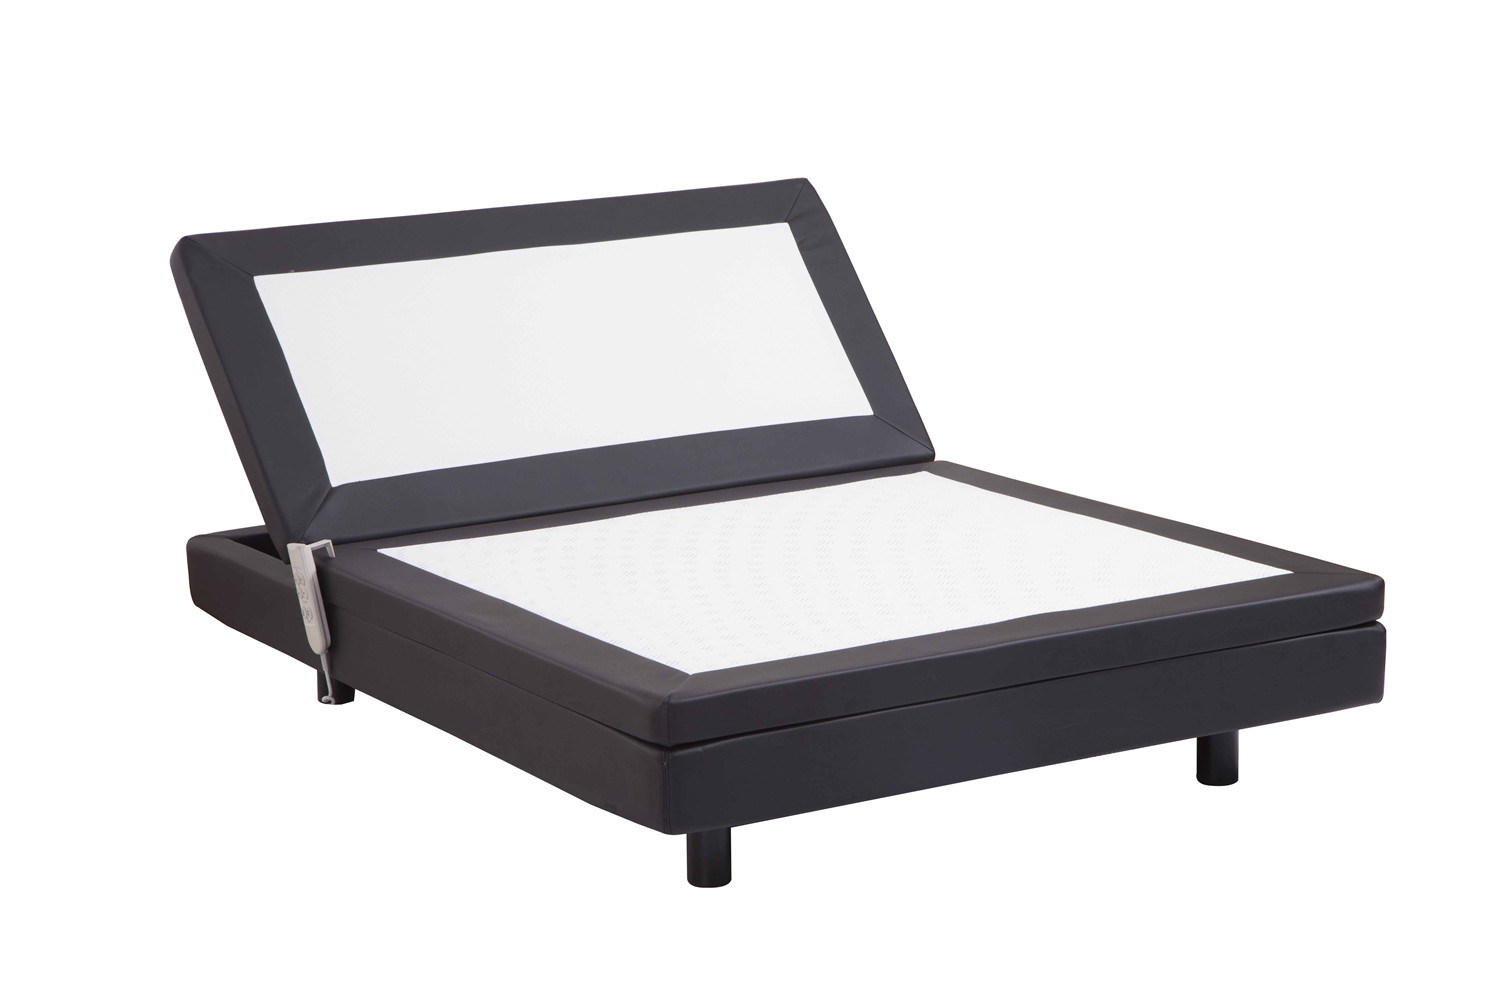 Head and Foot up and Down Controlled by Wired or Wireless Remote as Customized Adjustable Cinema Design Bed Frames